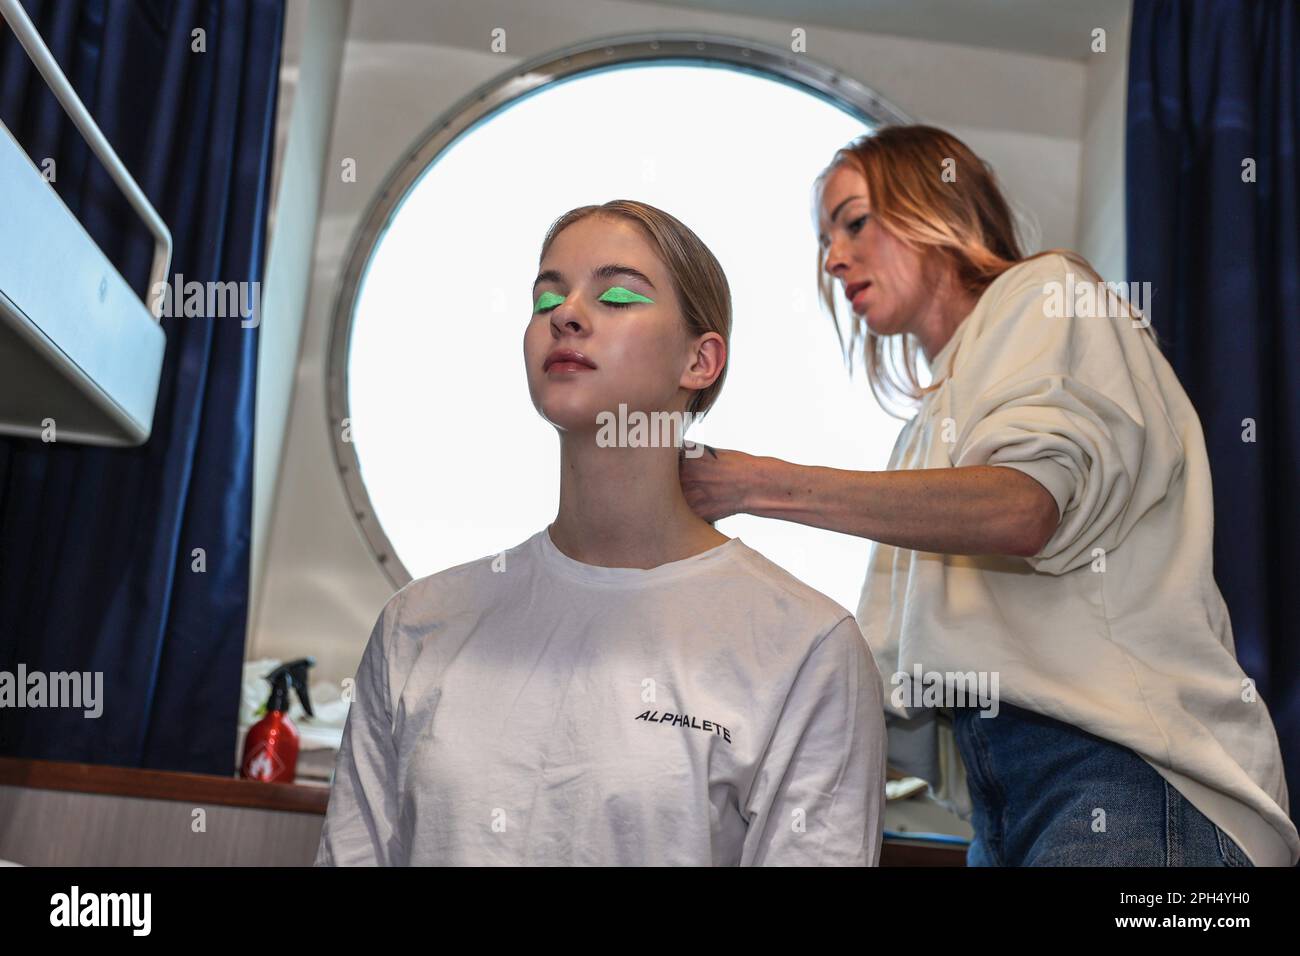 Helsinki, Finland. 24th Mar, 2023. Makeup artist stylist preparing model for fashion show. 26th March 2023 Eckero Line ship company organized Fashion Festival on the Finlandia ship that runs between Helsinki and Tallinn. The Fashion Festival has been realized in cooperation with Ivana Helsinki, piloted by Paola Suhonen. Credit: SOPA Images Limited/Alamy Live News Stock Photo